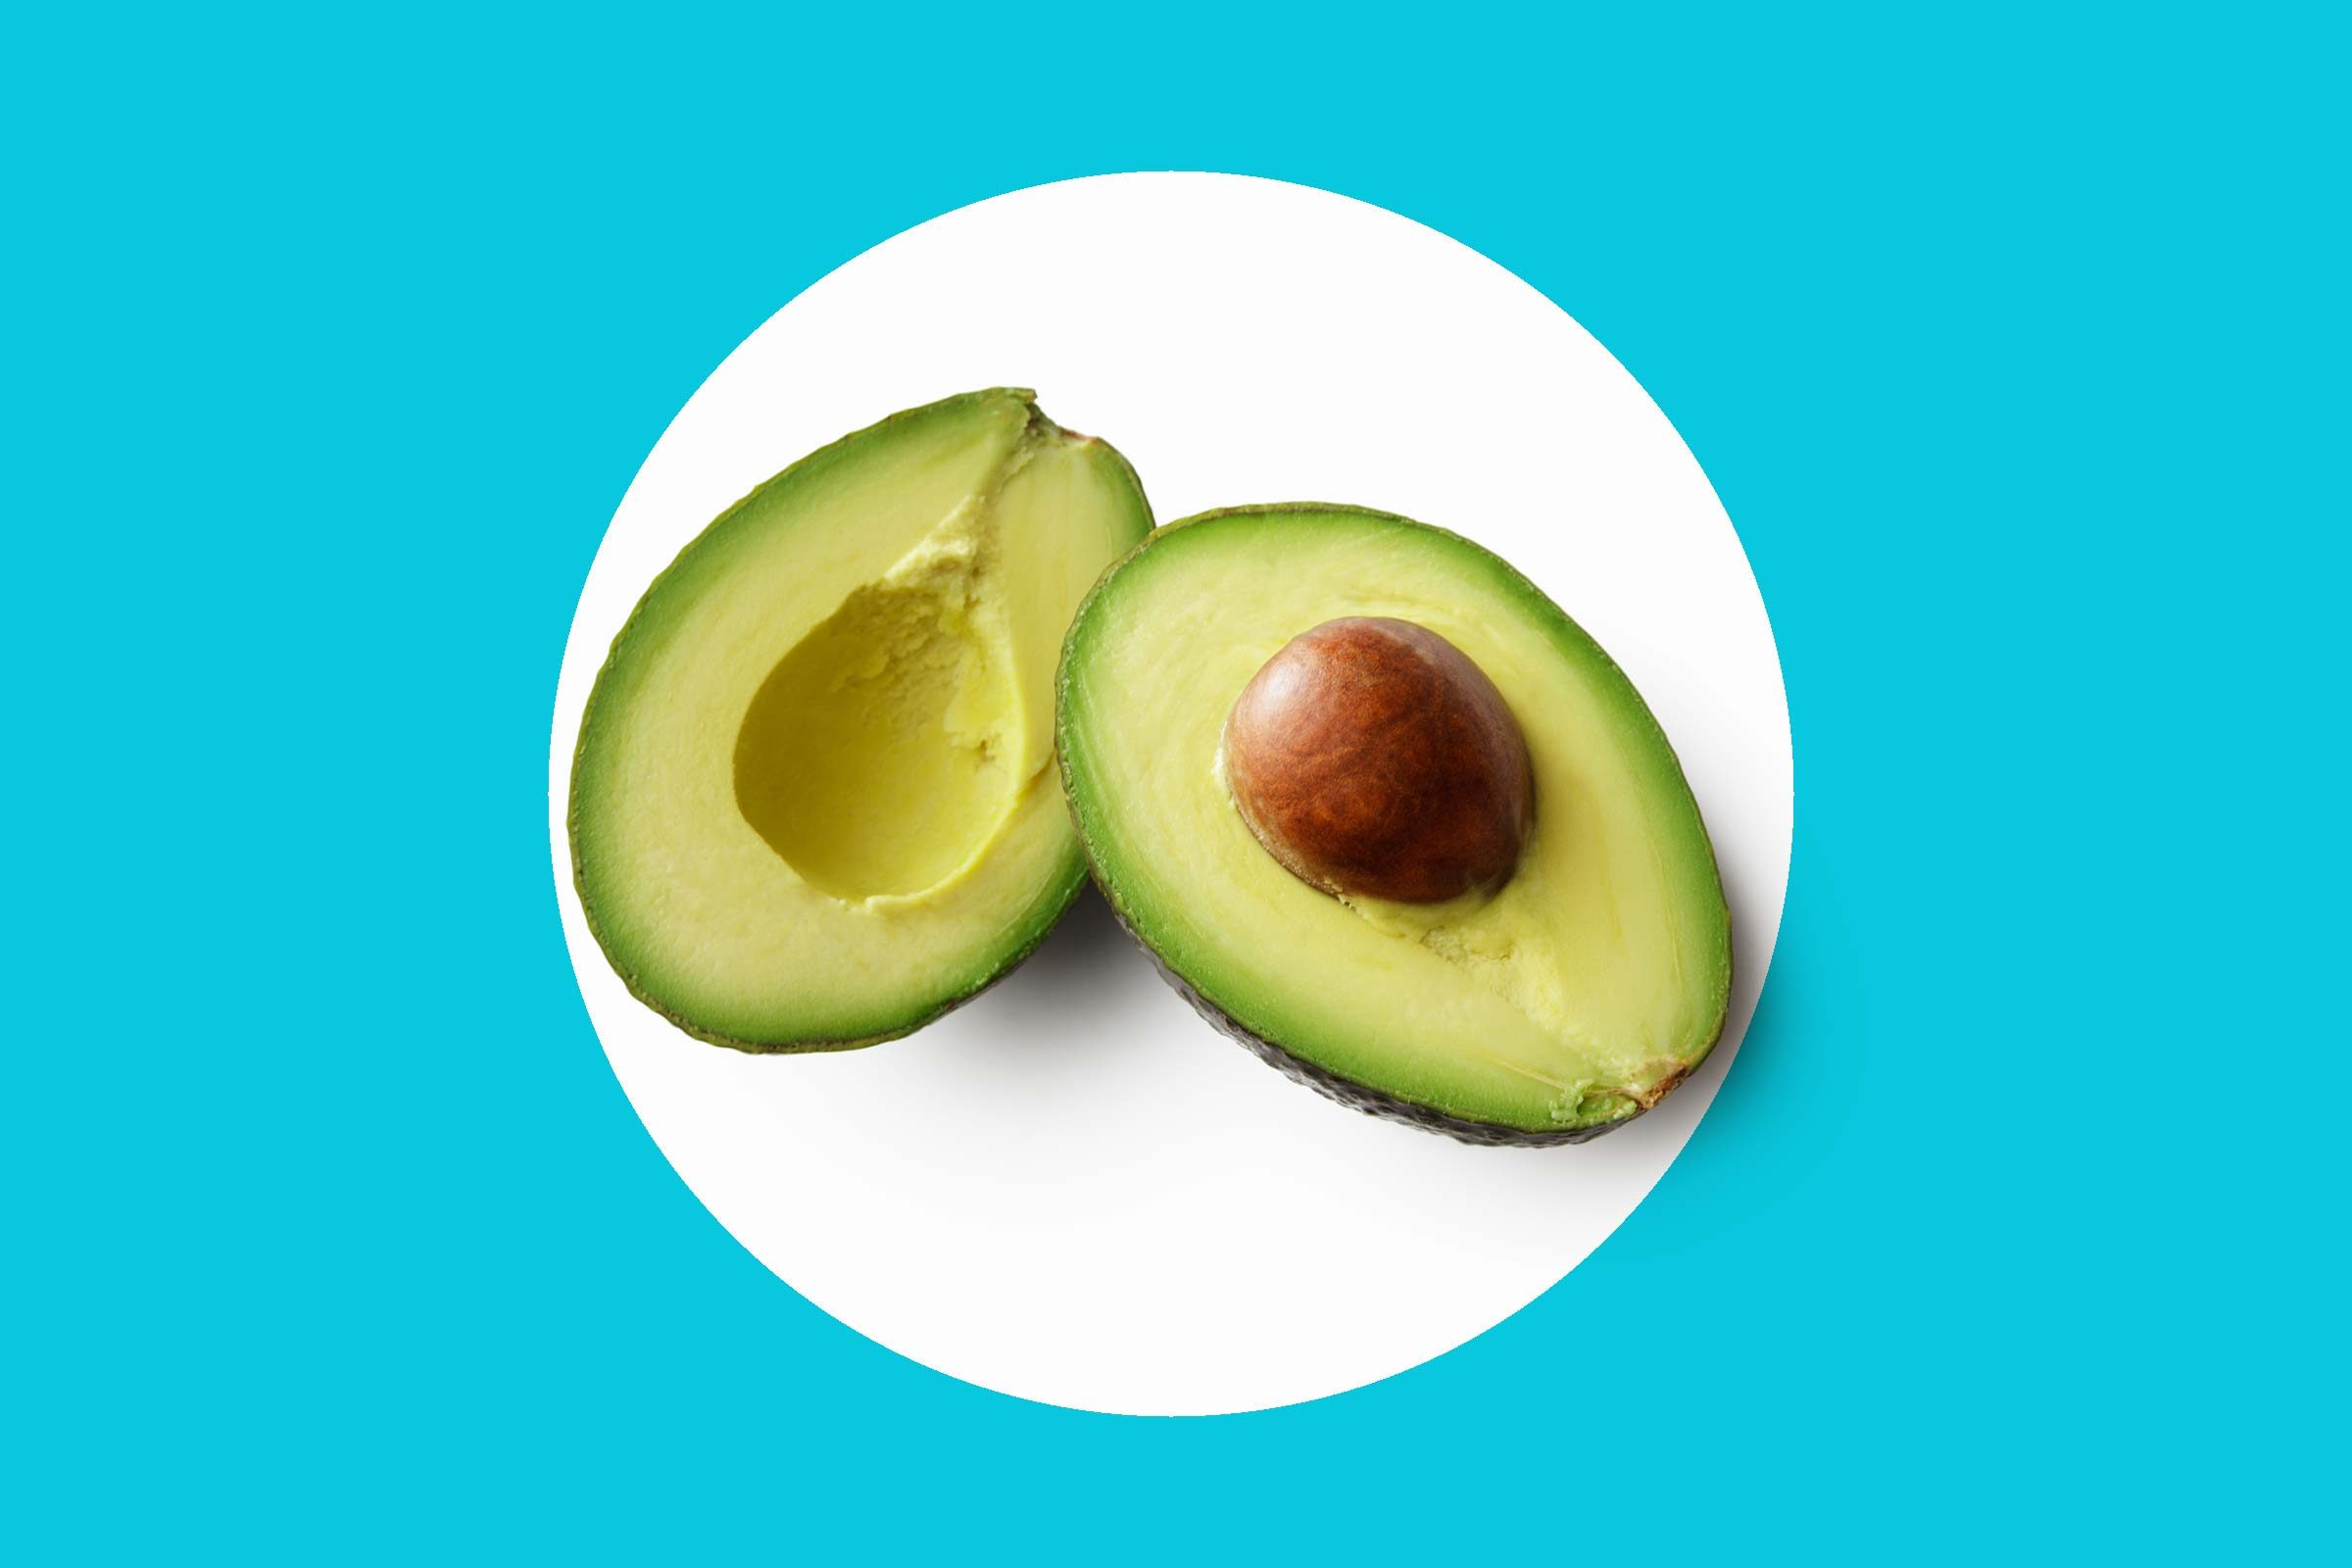 10 Foods for Healthy Hair That Can Make You Look Gorgeous